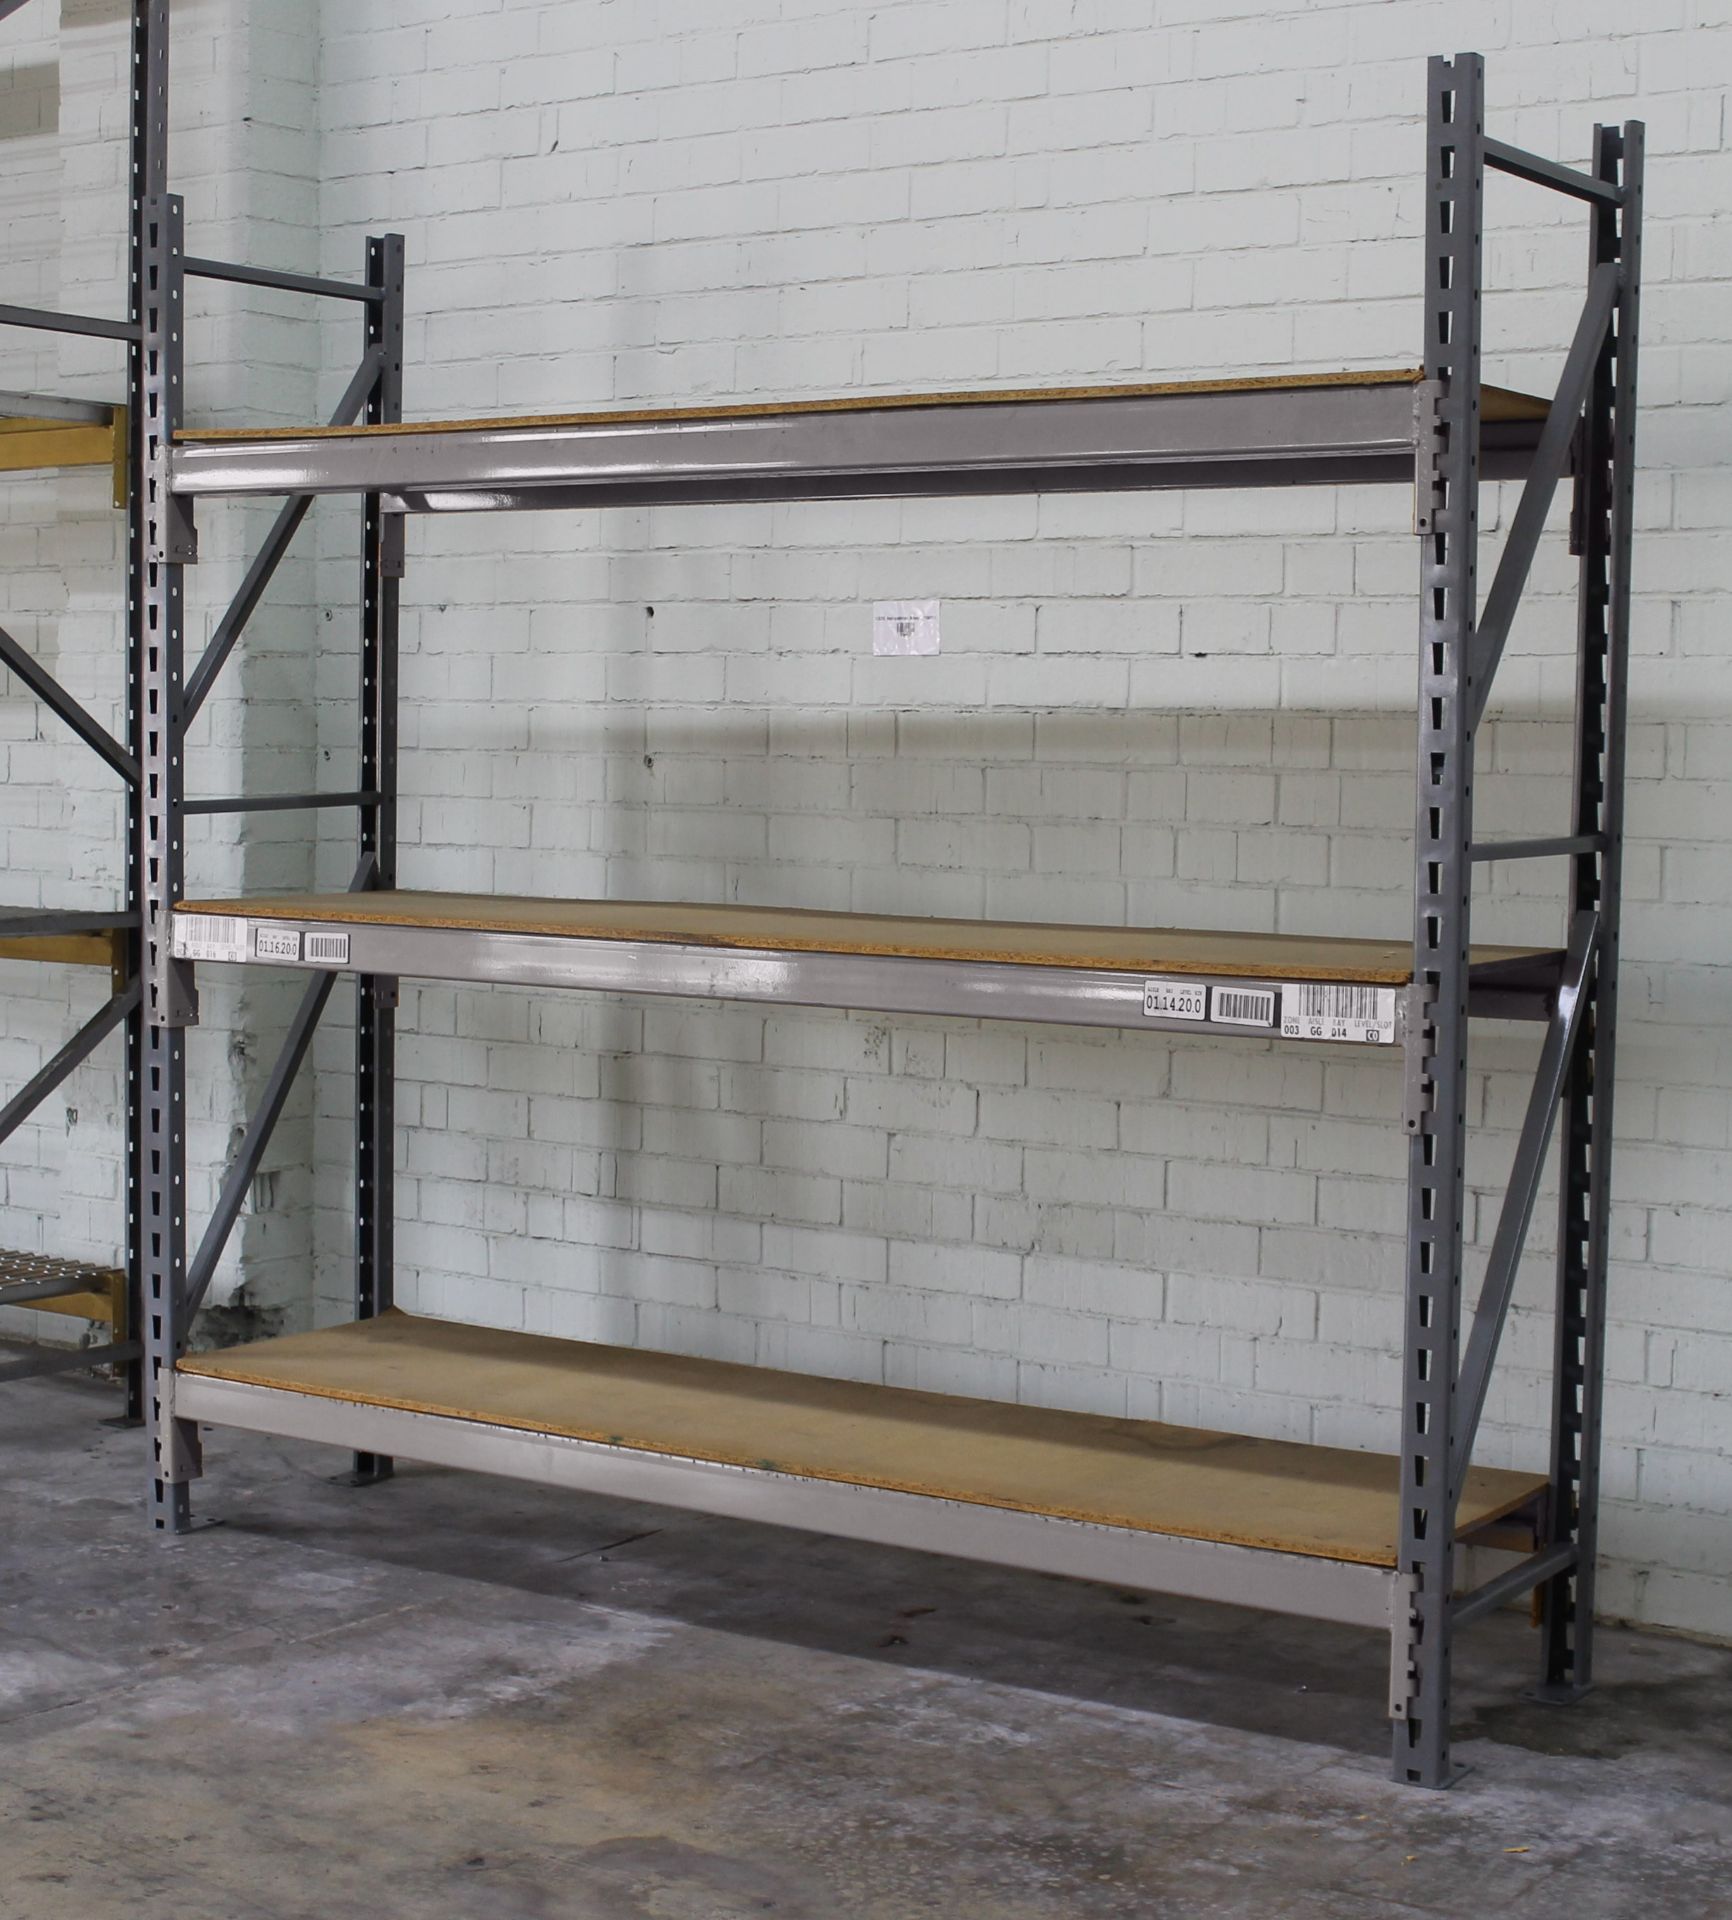 NEW 10 SECTIONS OF 96"H X 24"D X 96"L STOCK ROOM PALLET RACK SHELVING